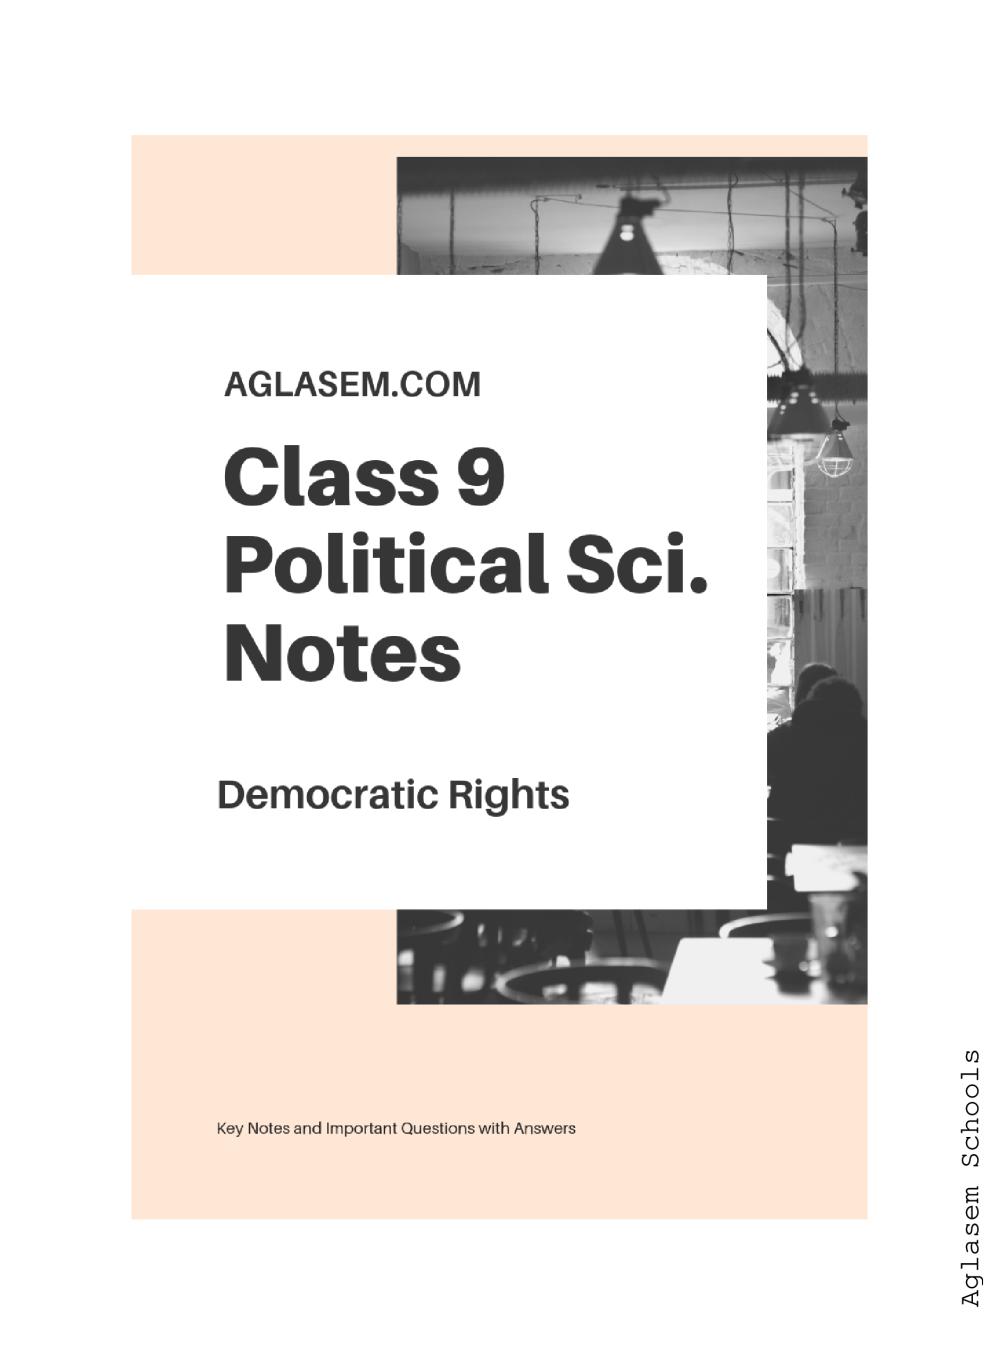 Class 9 Social Science Political Science / Civics Notes for Democratic Rights - Page 1